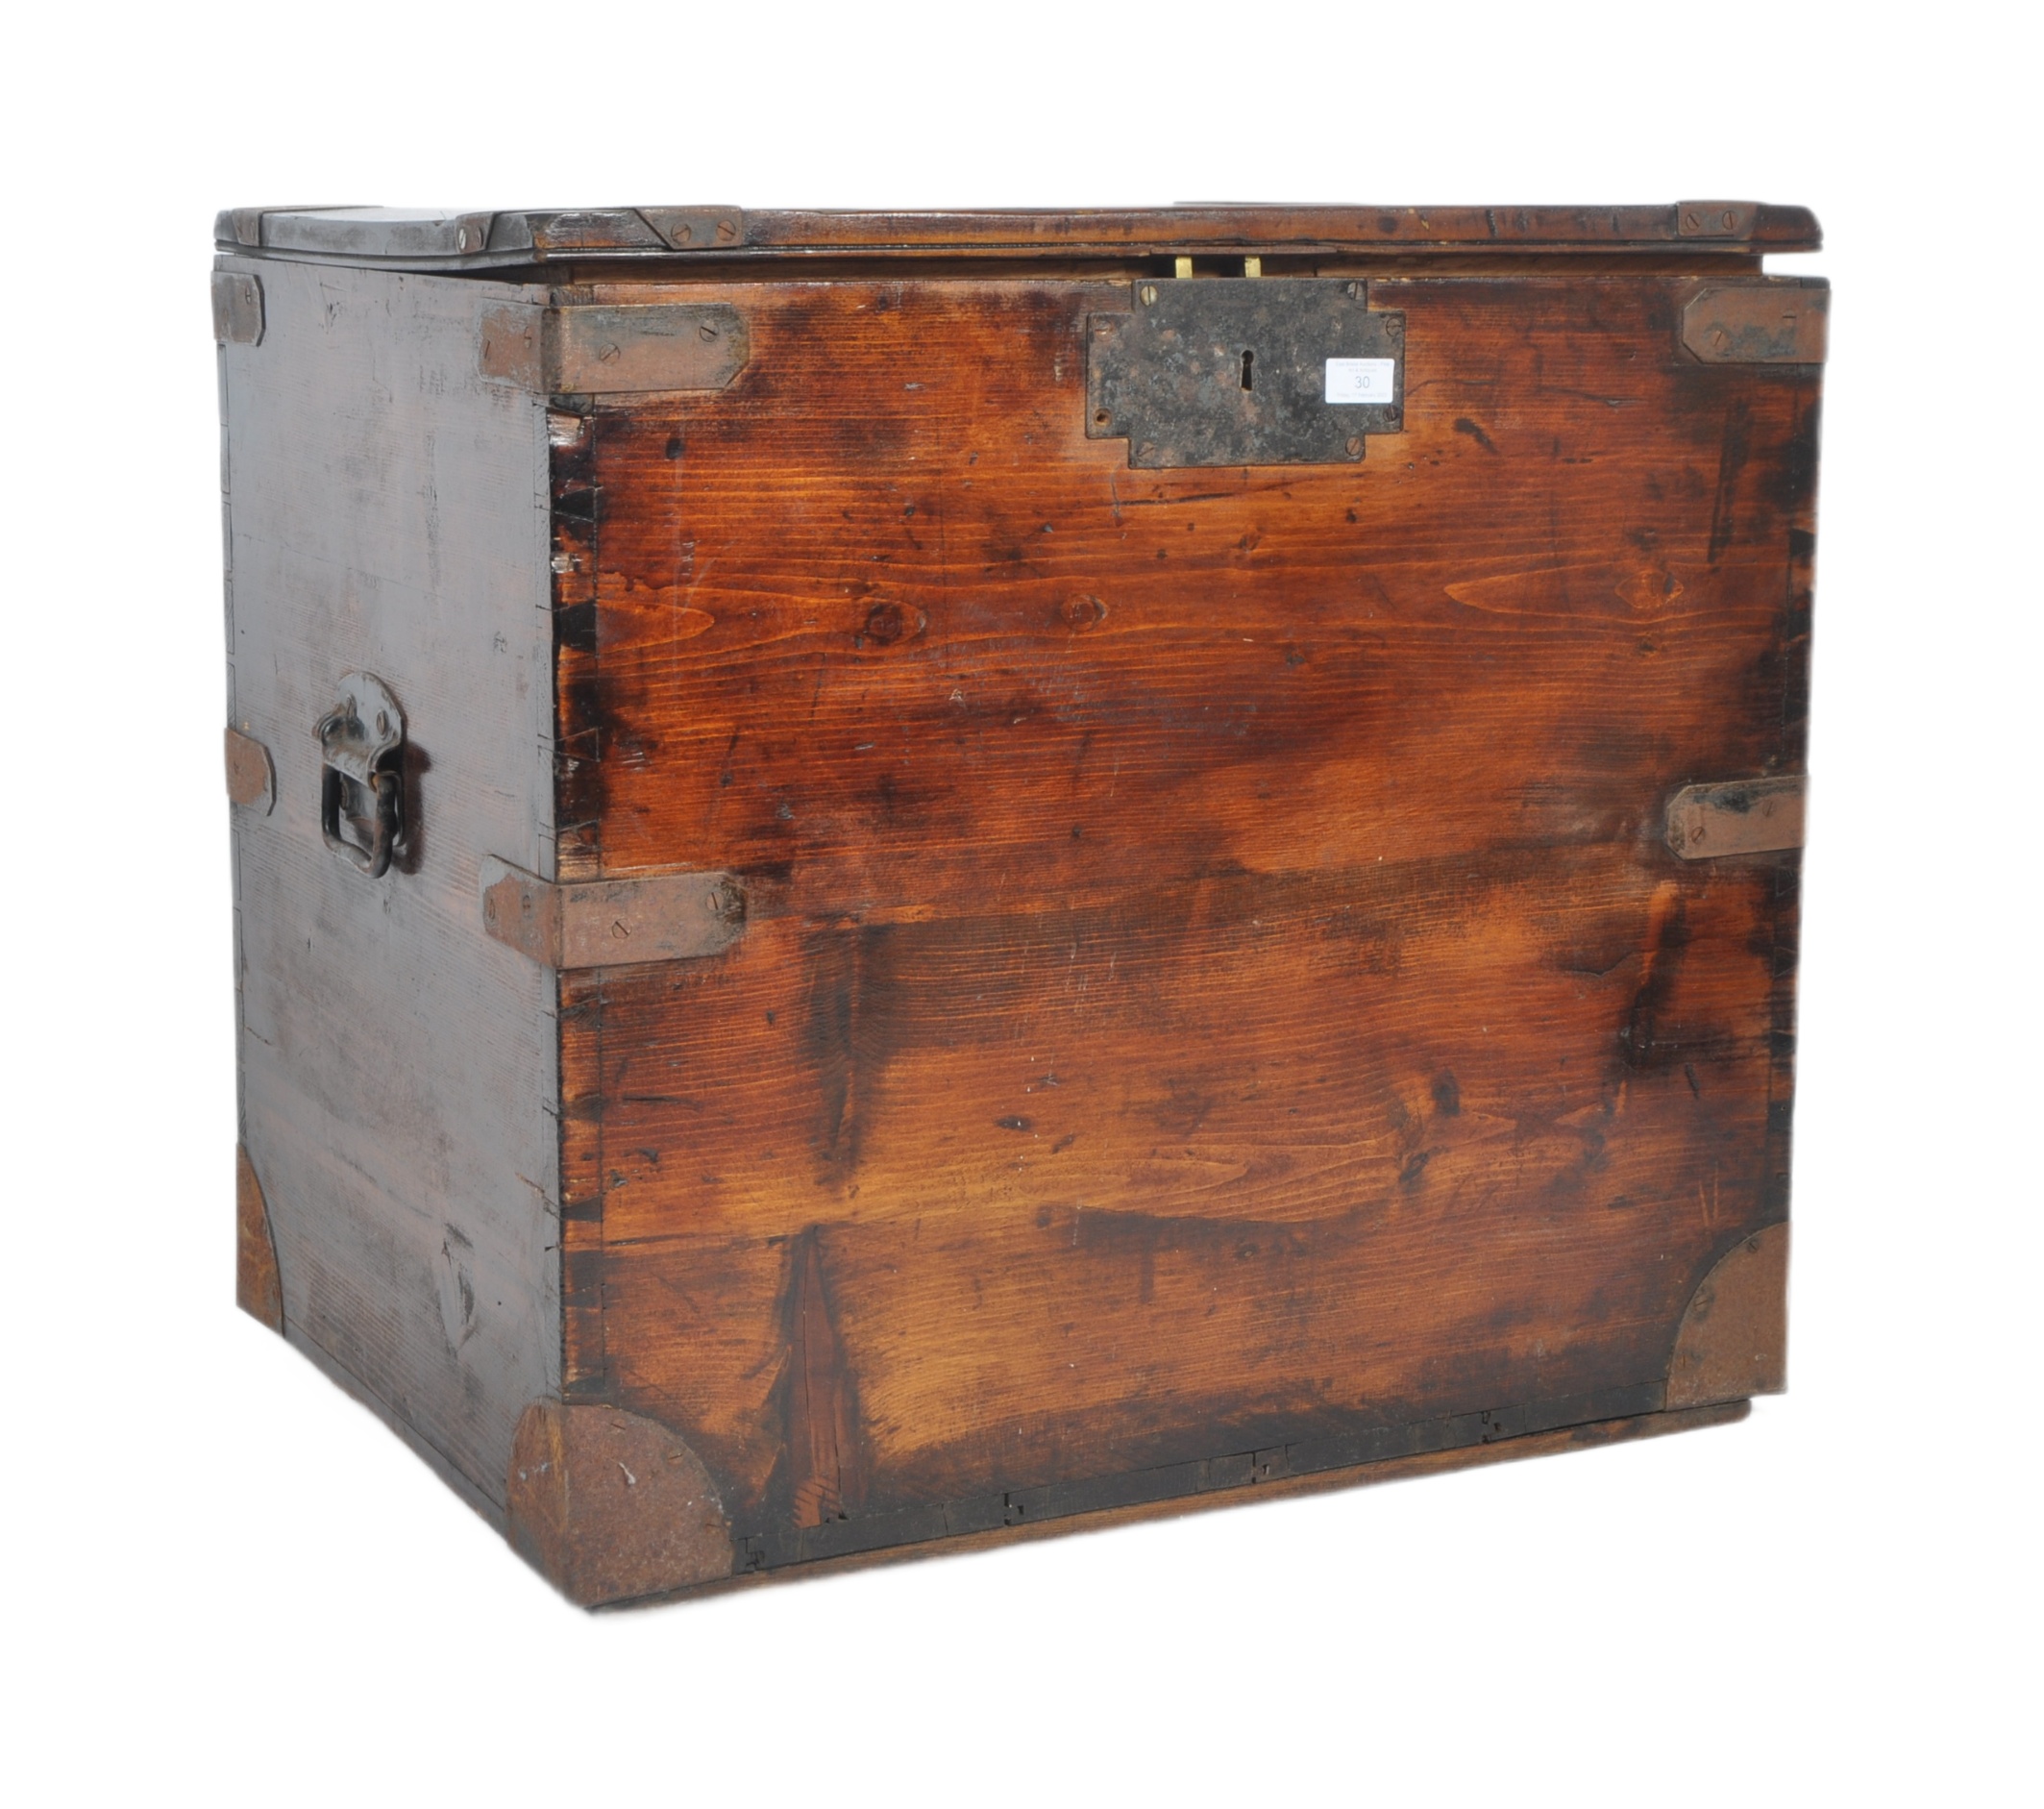 19TH CENTURY MILITARY CAMPAIGN SILVER CHEST TRUNK